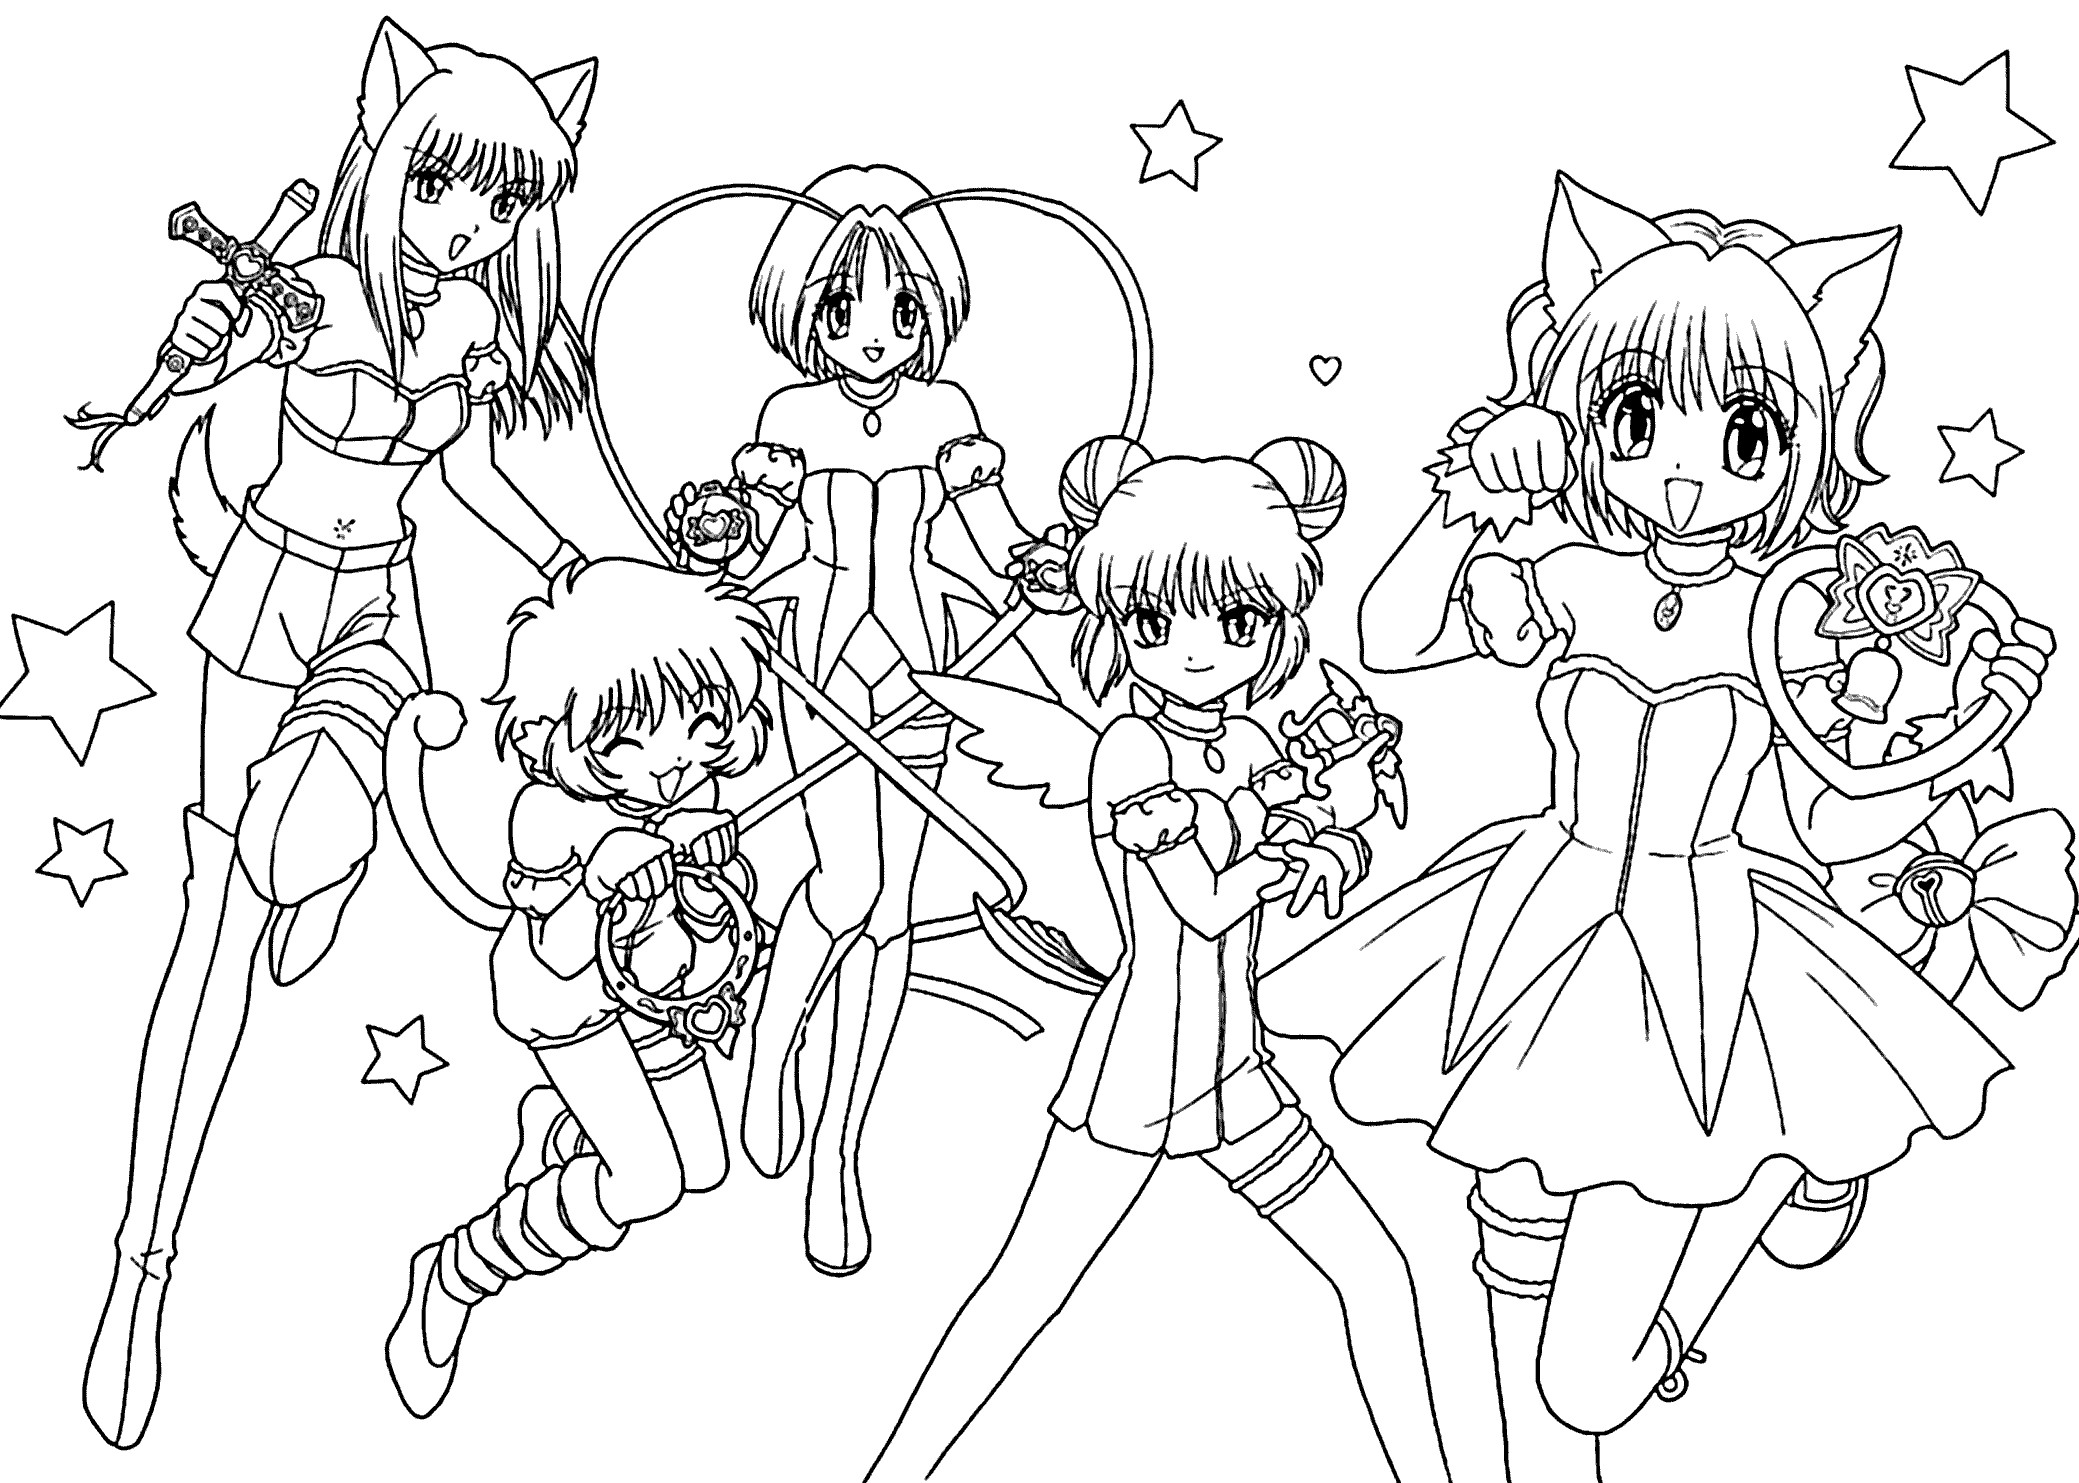 Anime Coloring Pages For Kids
 Mew mew team anime coloring pages for kids printable free